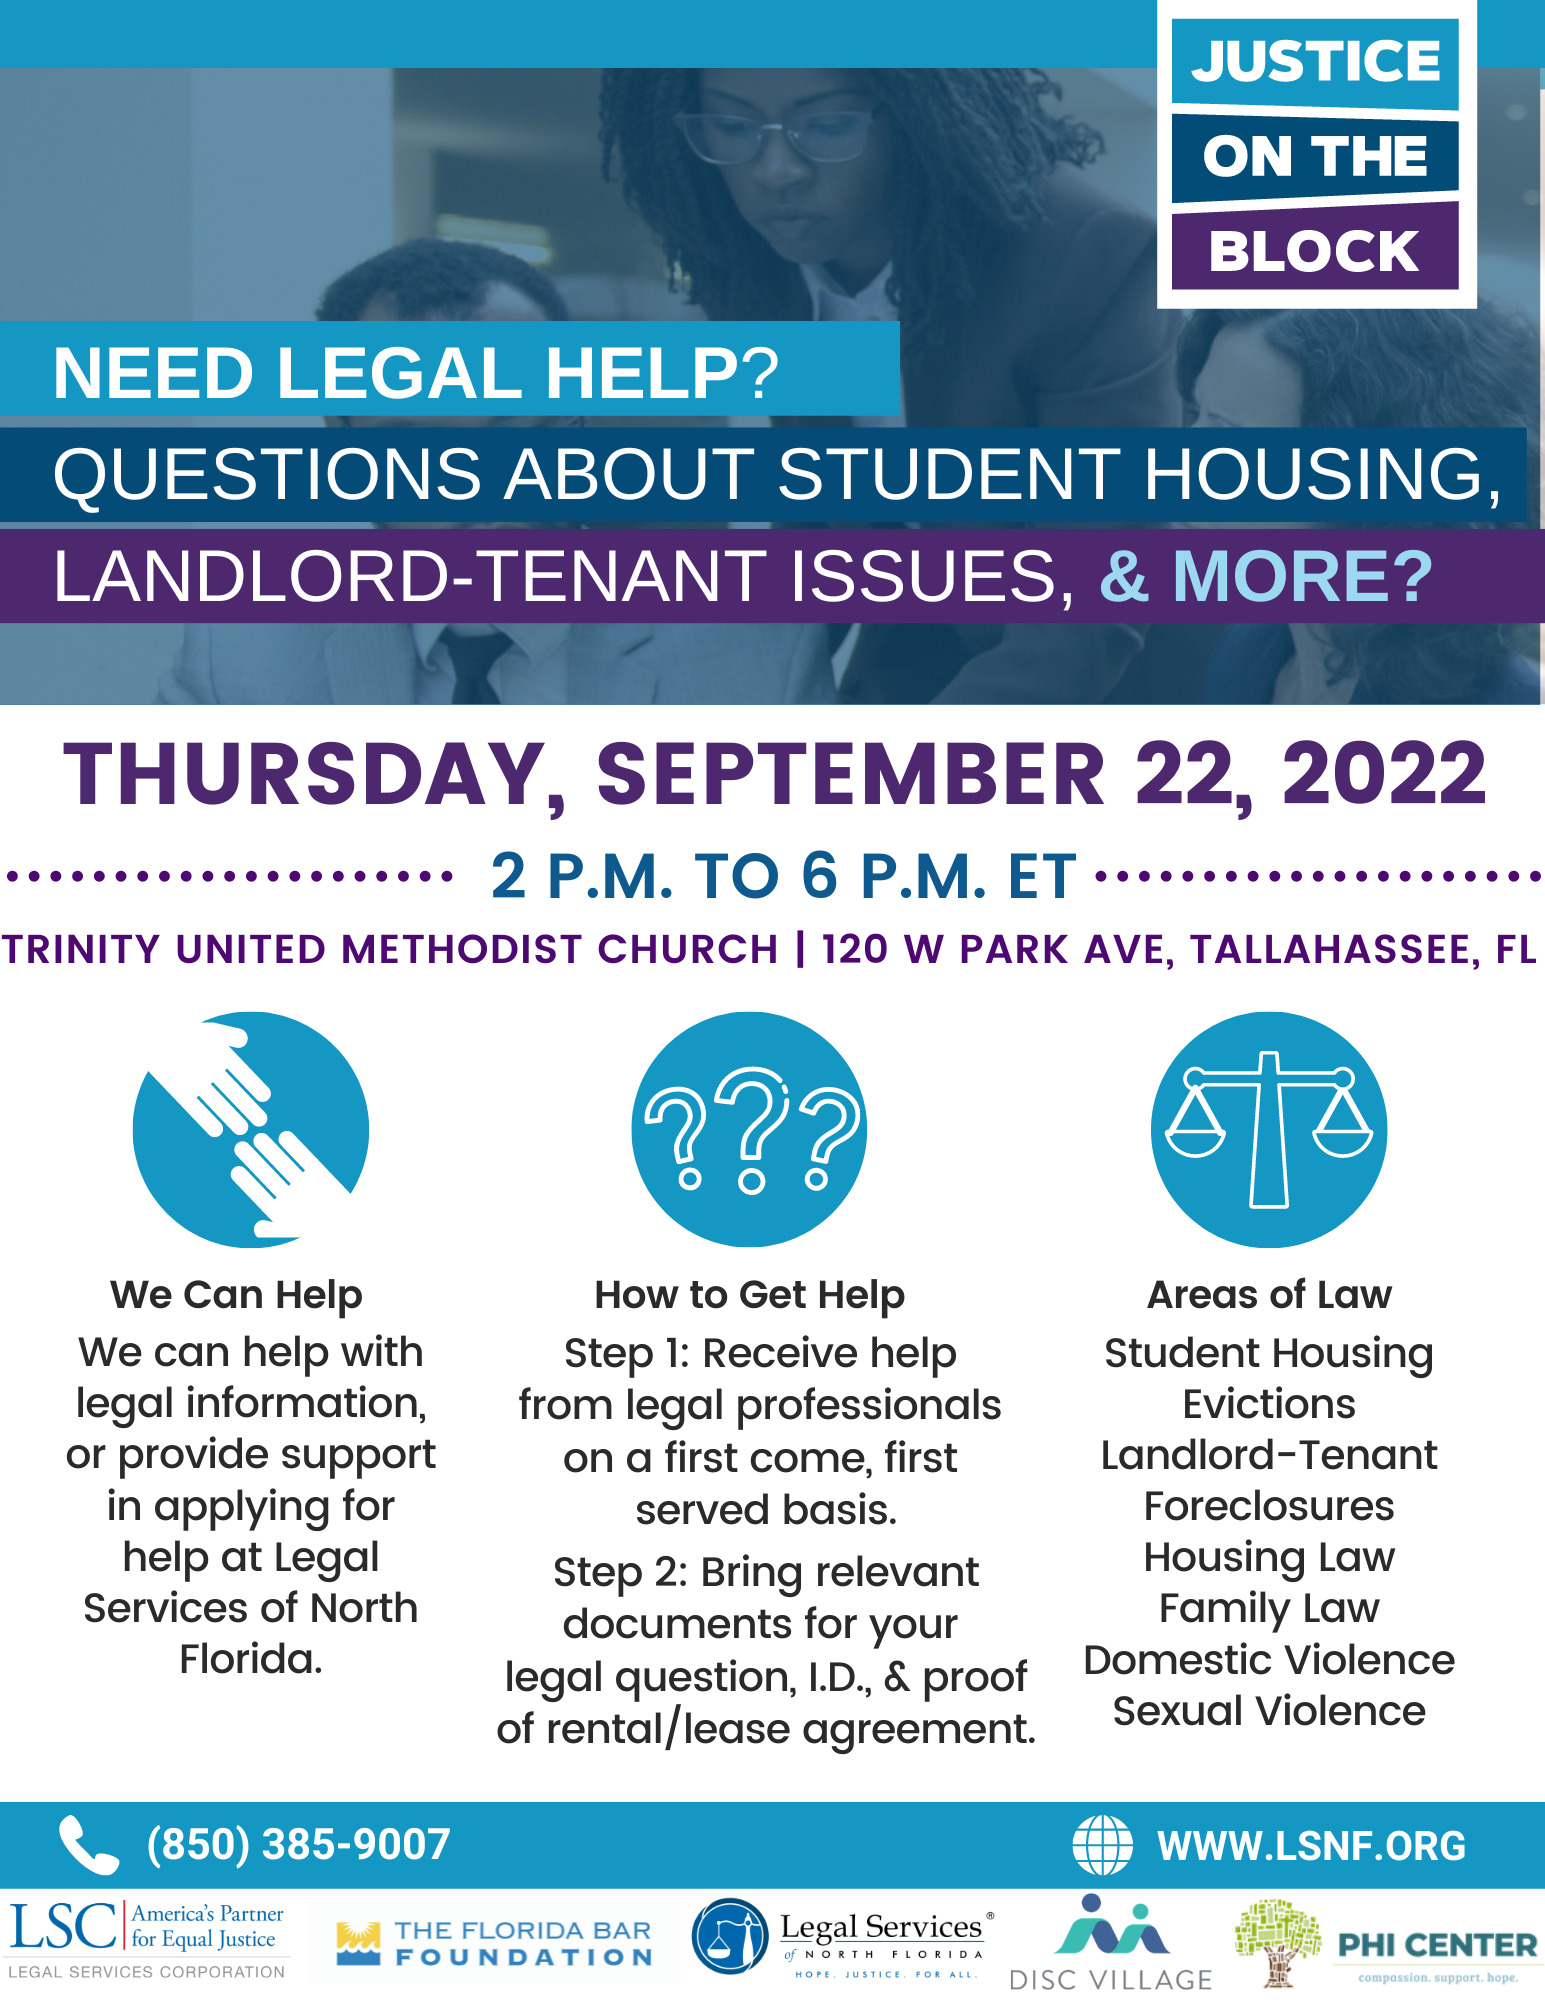 JOTB Rental Assistance Evictions TLH 9 22 2022